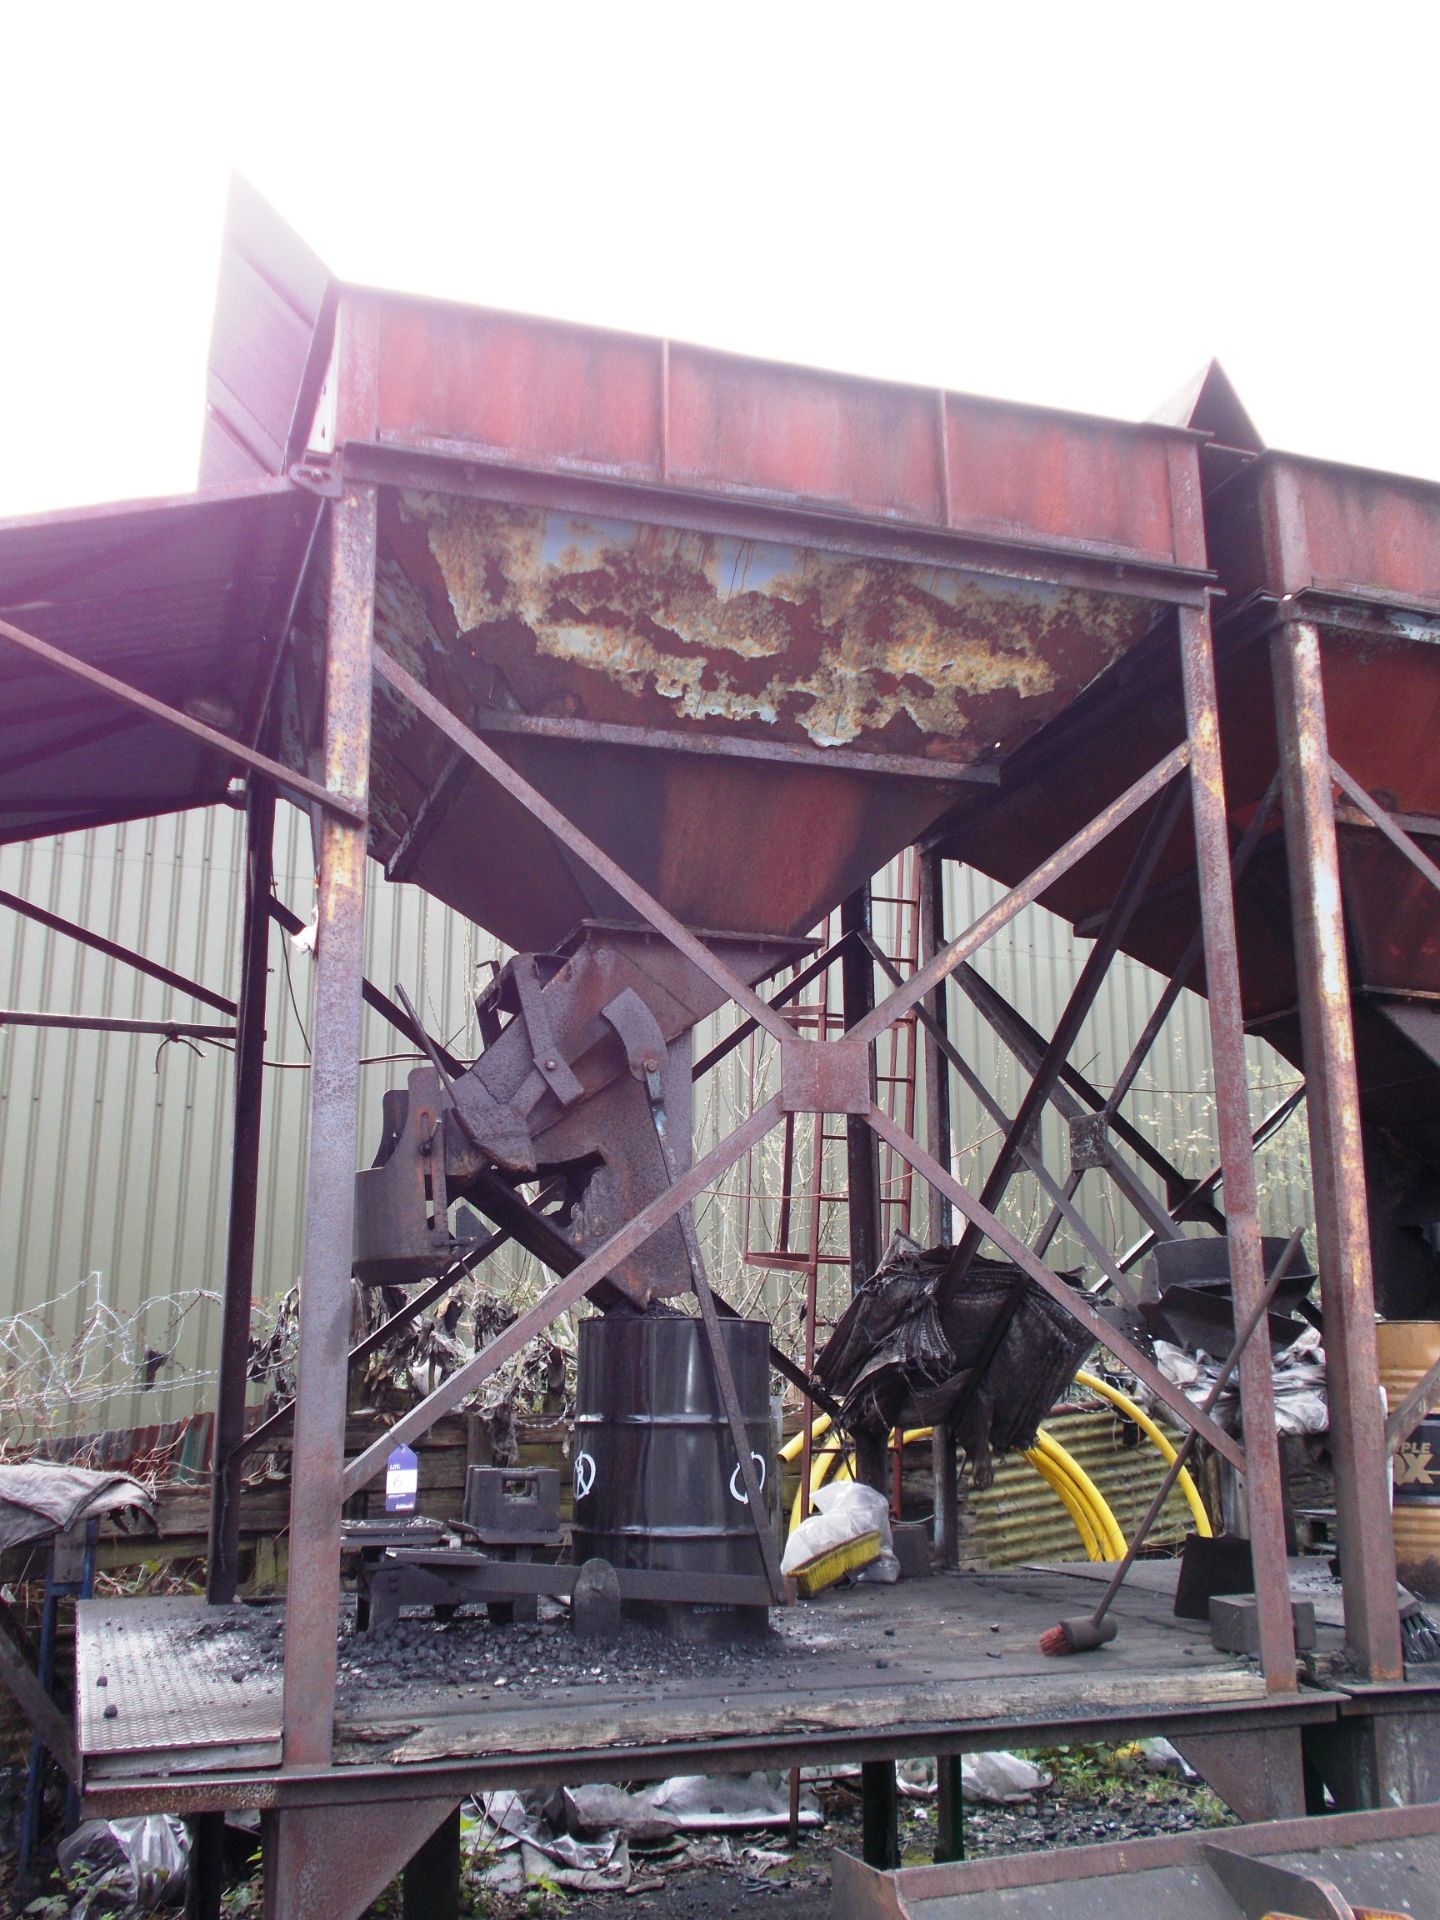 Coal hopper, with an approximate capacity of 1 tonne, equipped with weighing scales (possibly